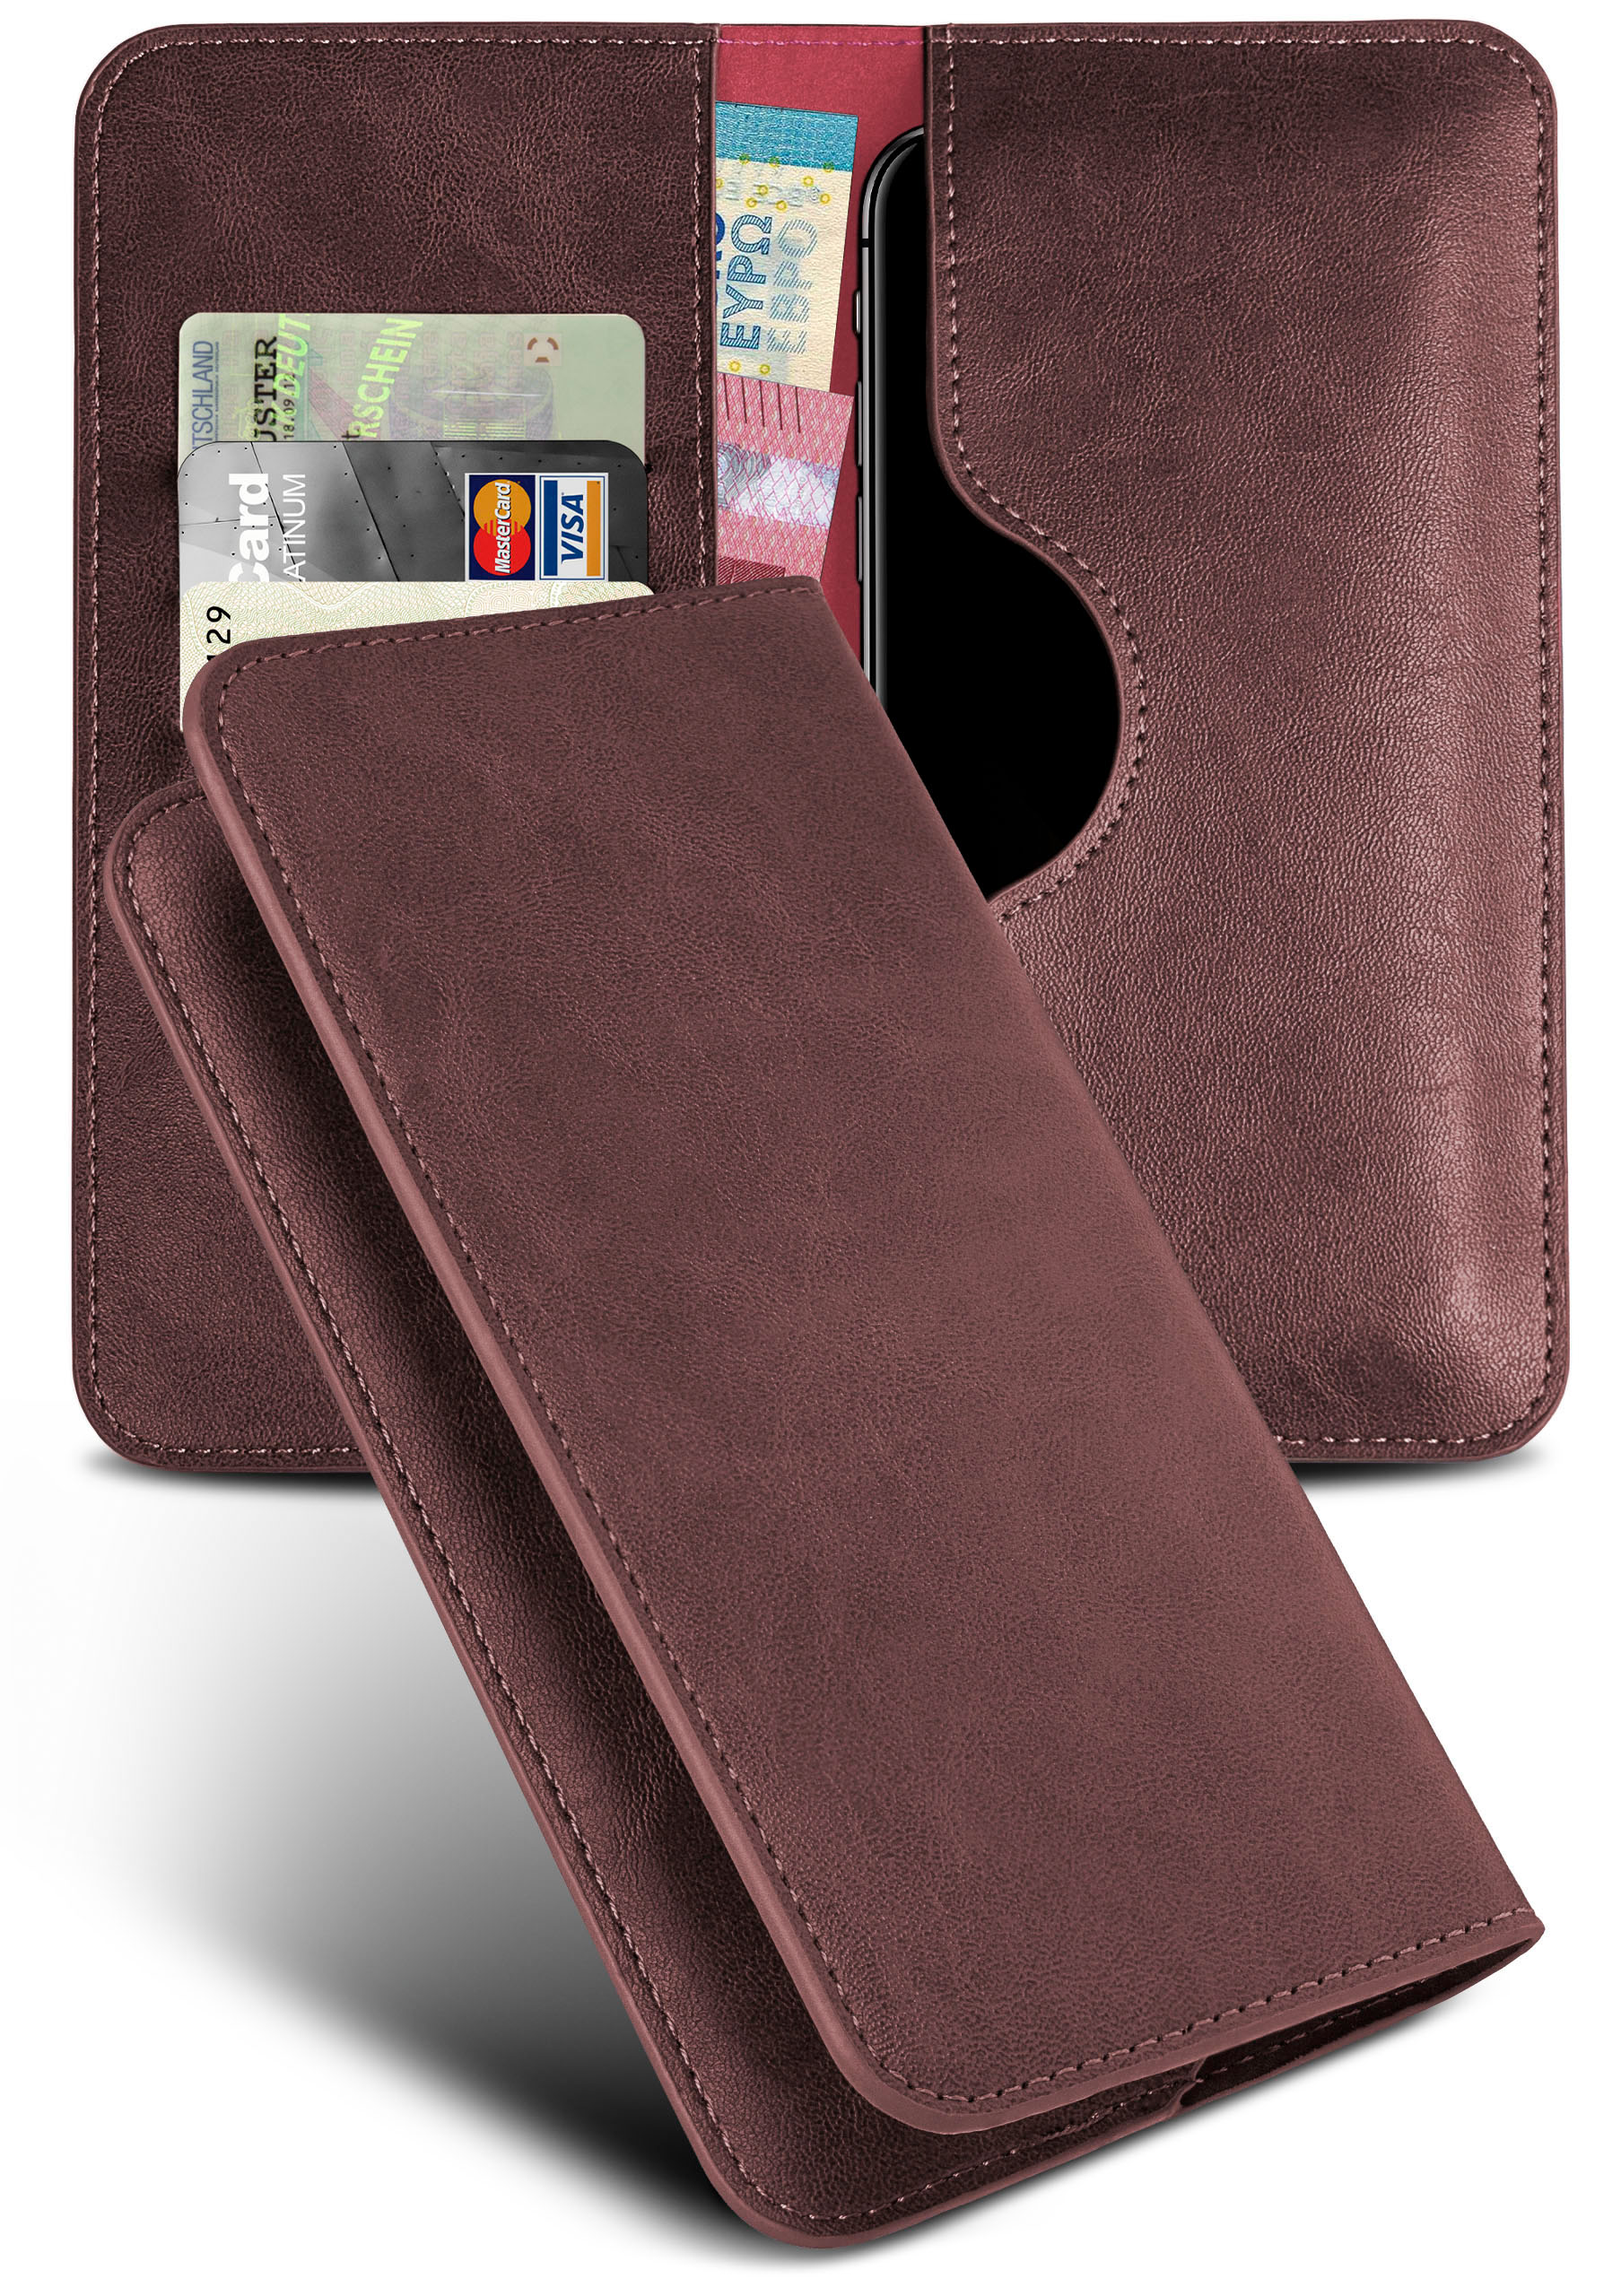 Case, Z1 Flip Cover, Sony, Weinrot MOEX Purse Compact, Xperia